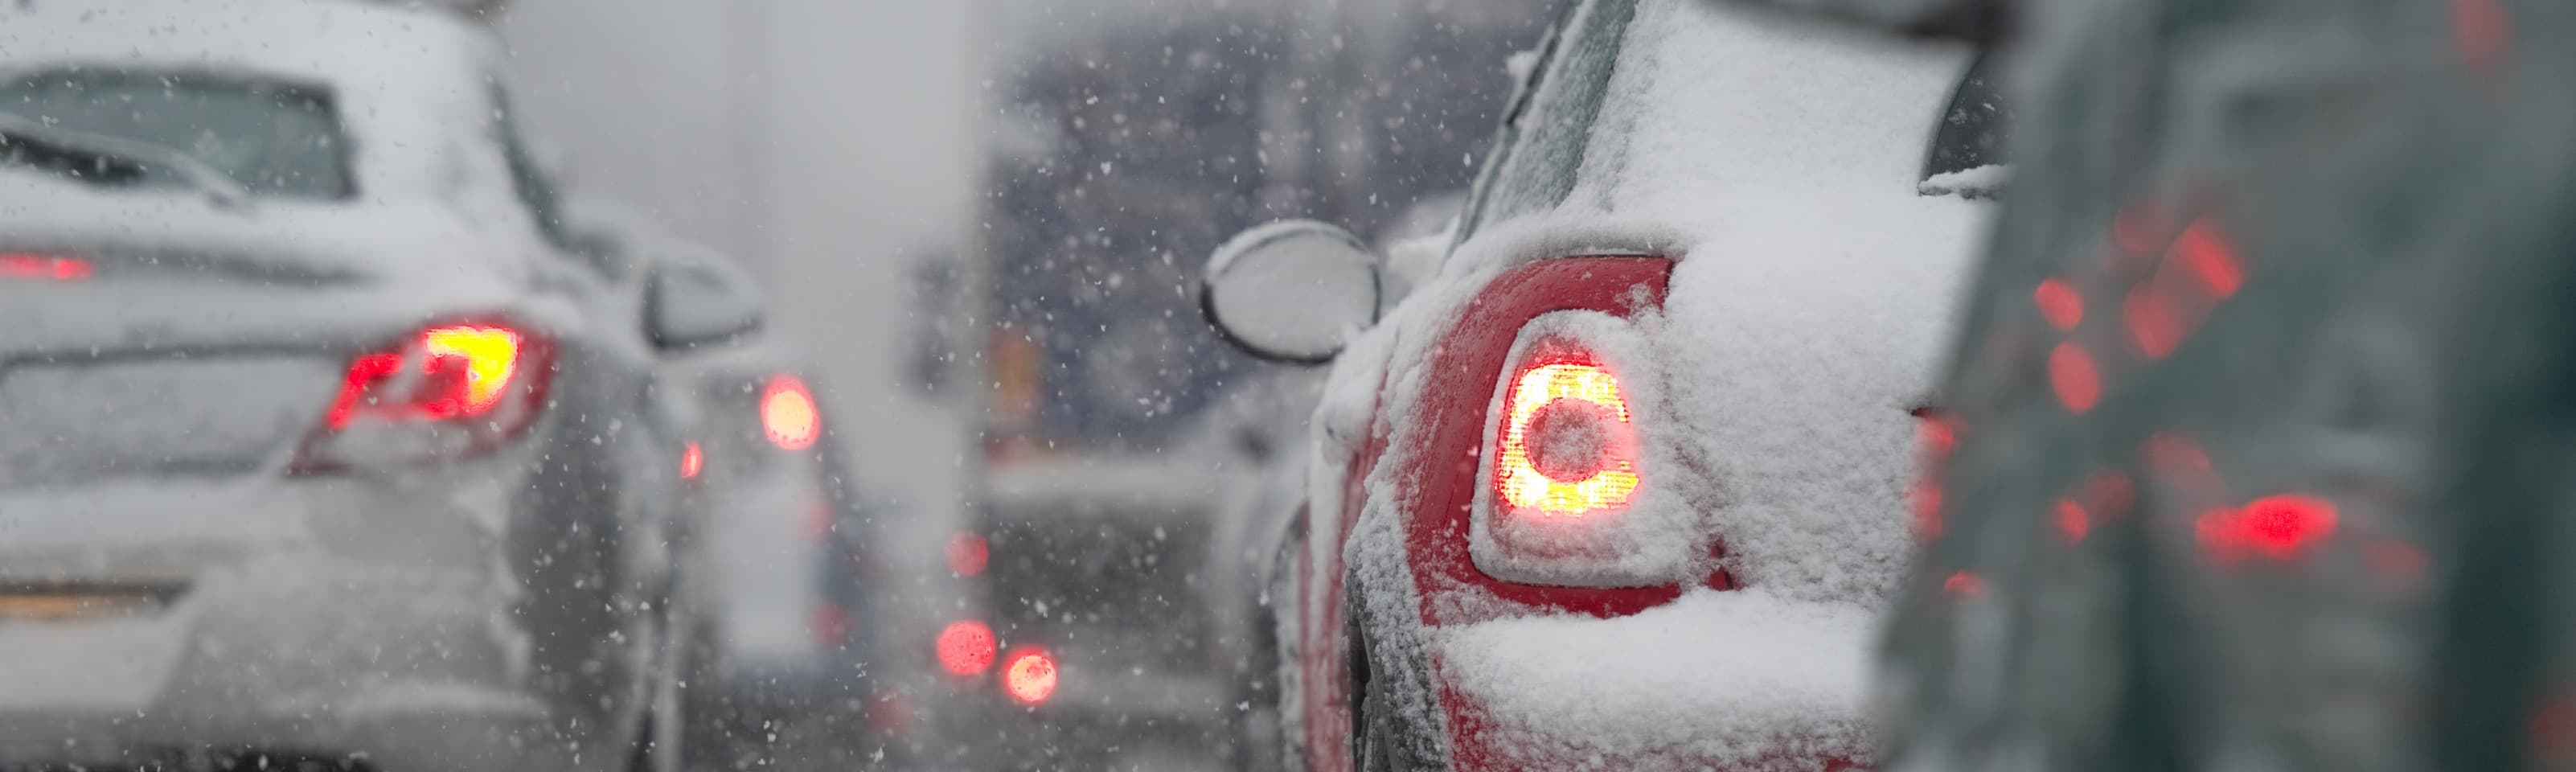 Our top 3 tips for driving home during the busy Christmas period